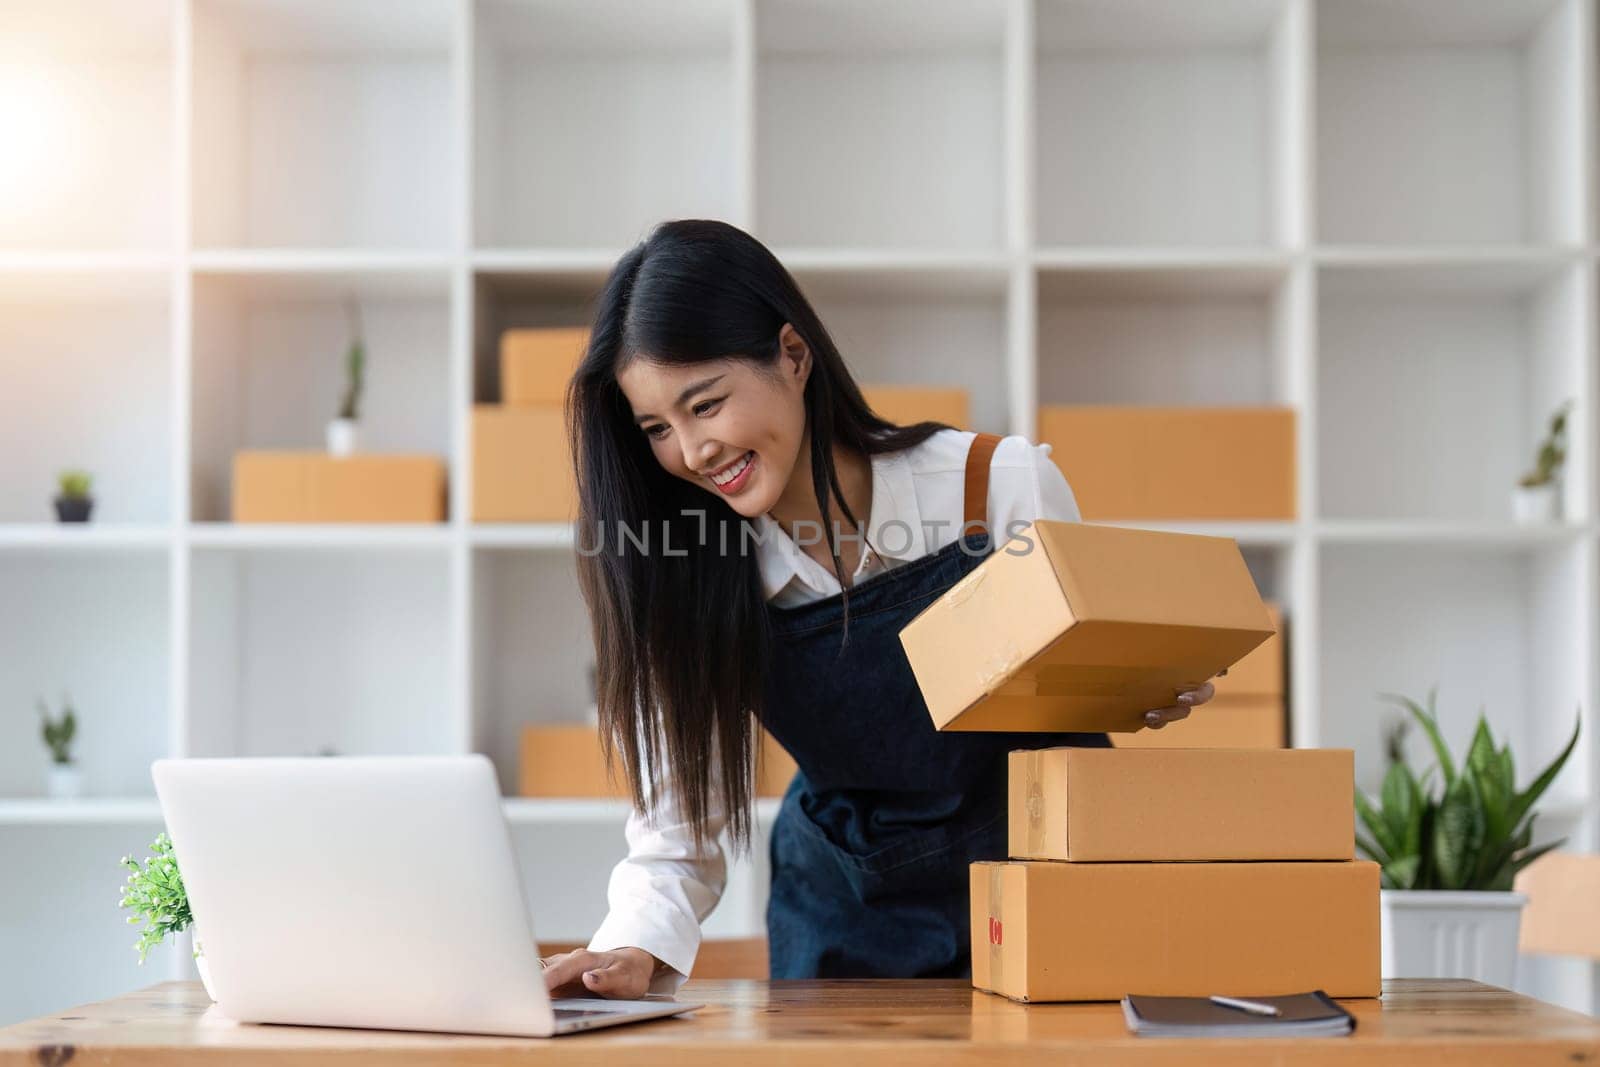 Startup SME small business entrepreneur of freelance Asian woman using laptop and box to receive and review orders online to prepare to pack sell to customers, online sme business ideas by nateemee